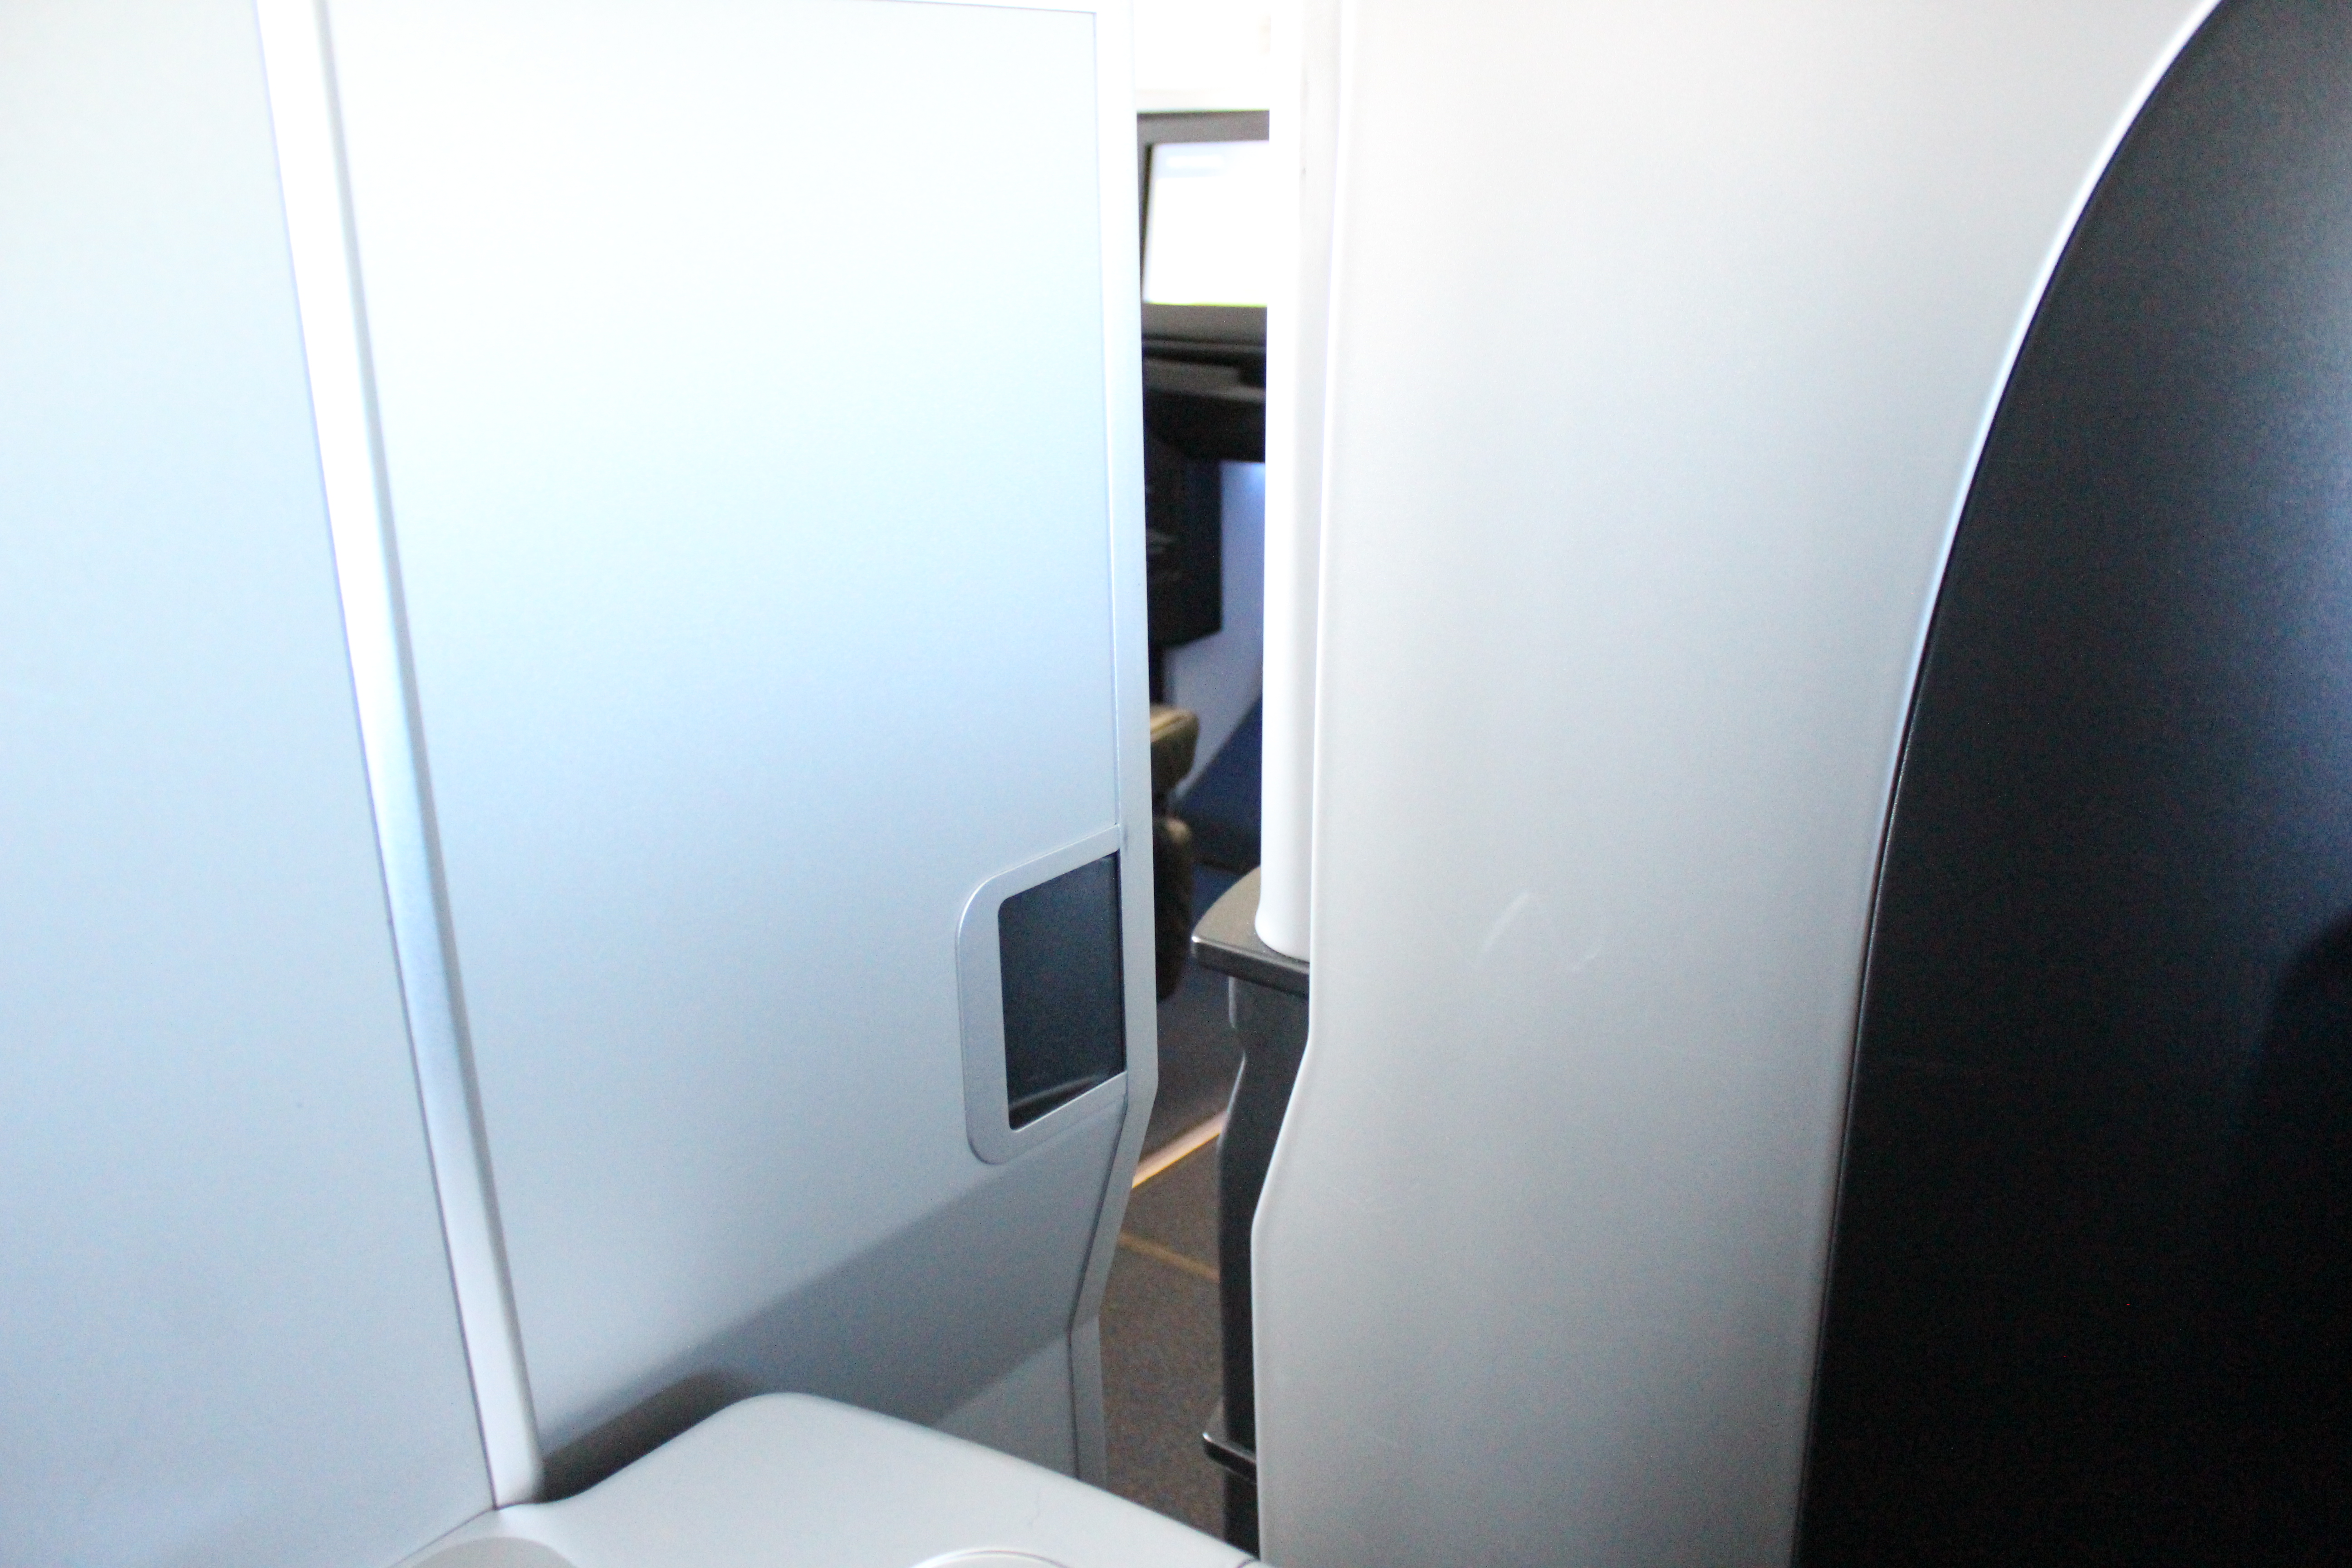 a door and a toilet in an airplane